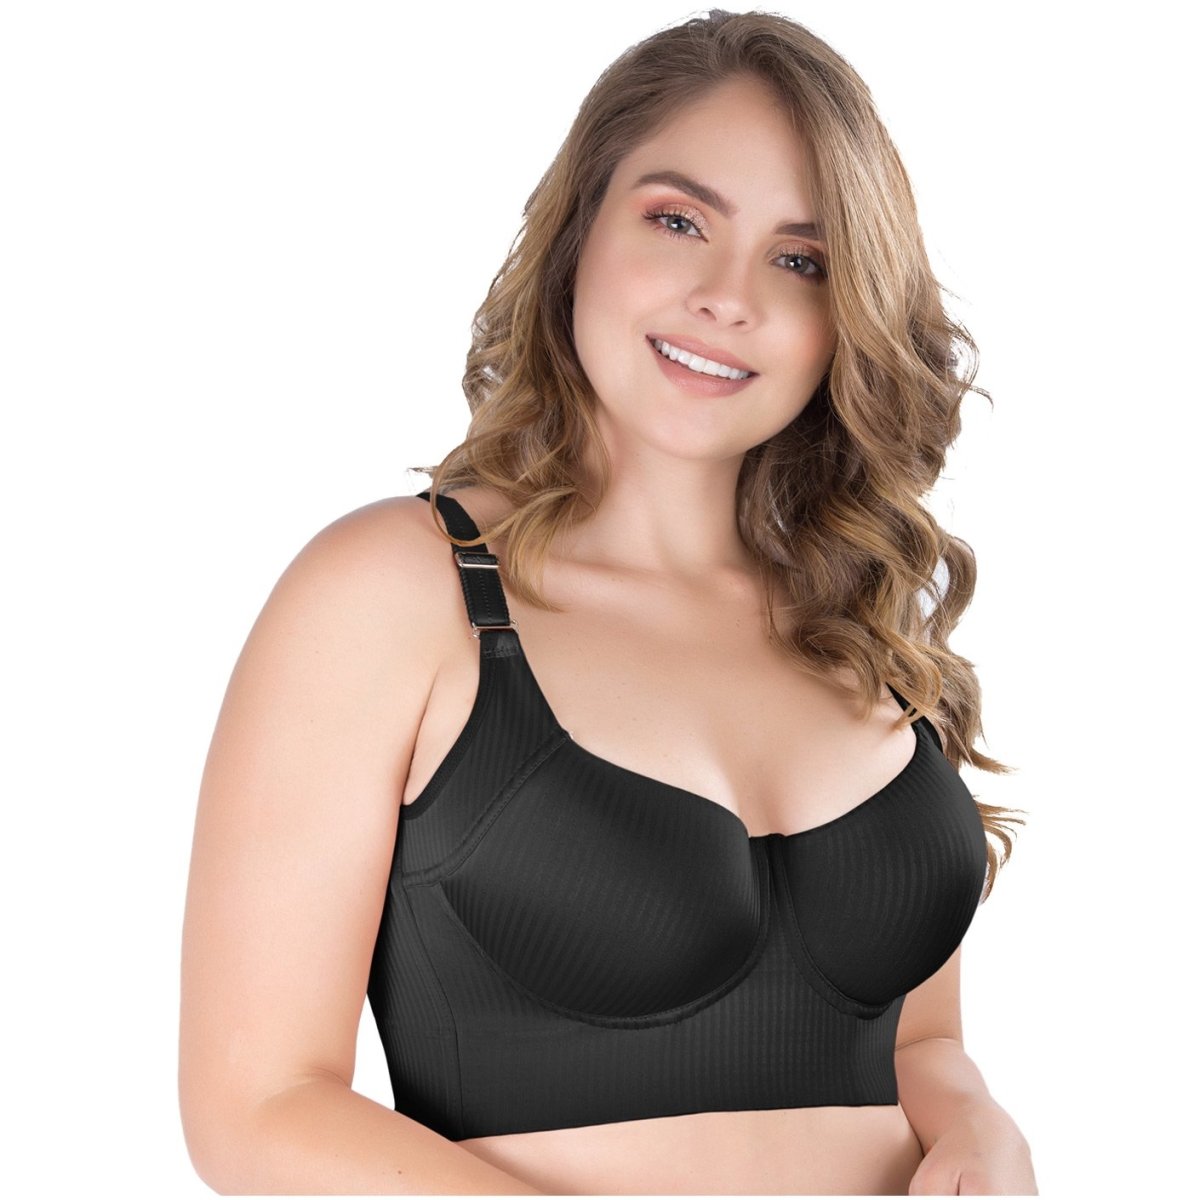 UpLady 8542 Extra Firm Control Full Cup Bra with Side Support - Colombian Body Shaper